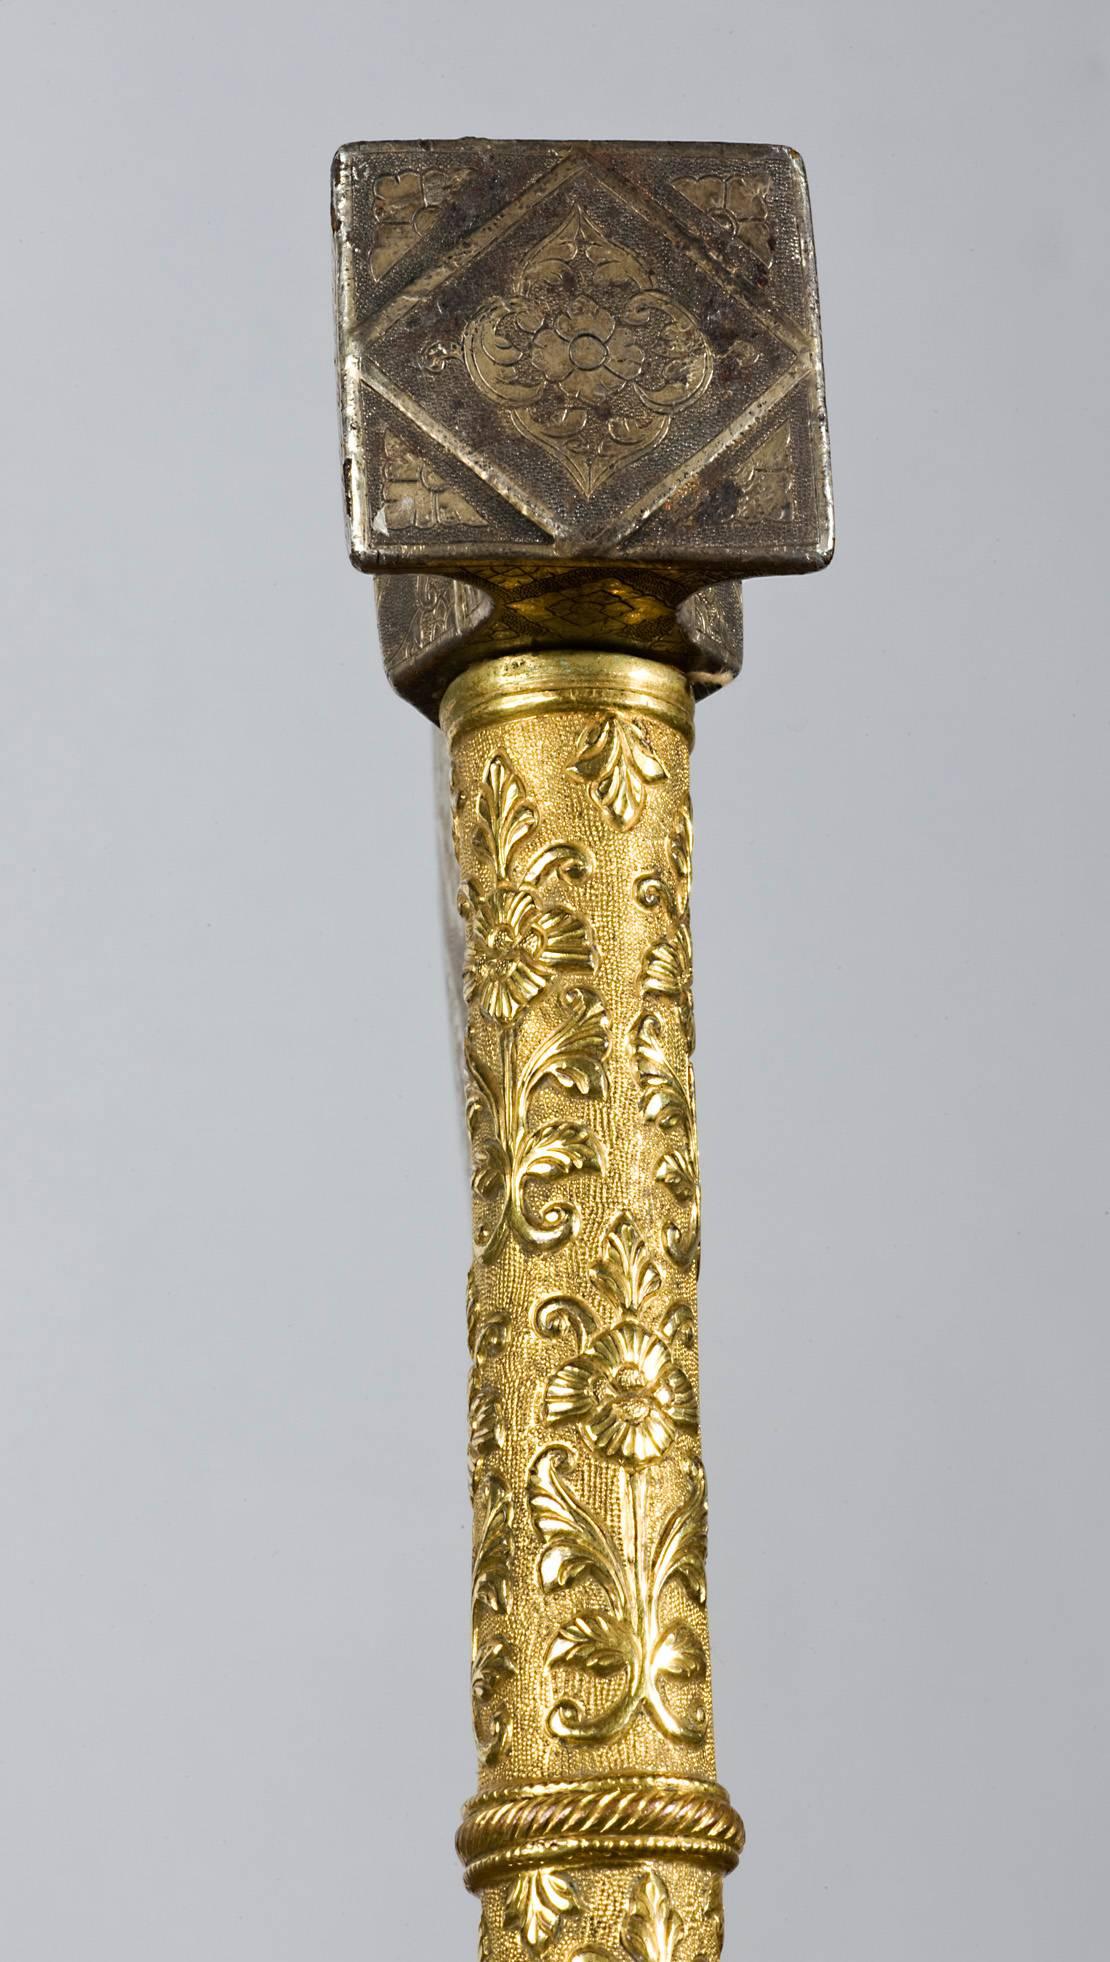 An 18th-19th century Indian important and high quality axe with gilt bronze handle, watered steel blade featuring beautiful gold carvings on its blade.